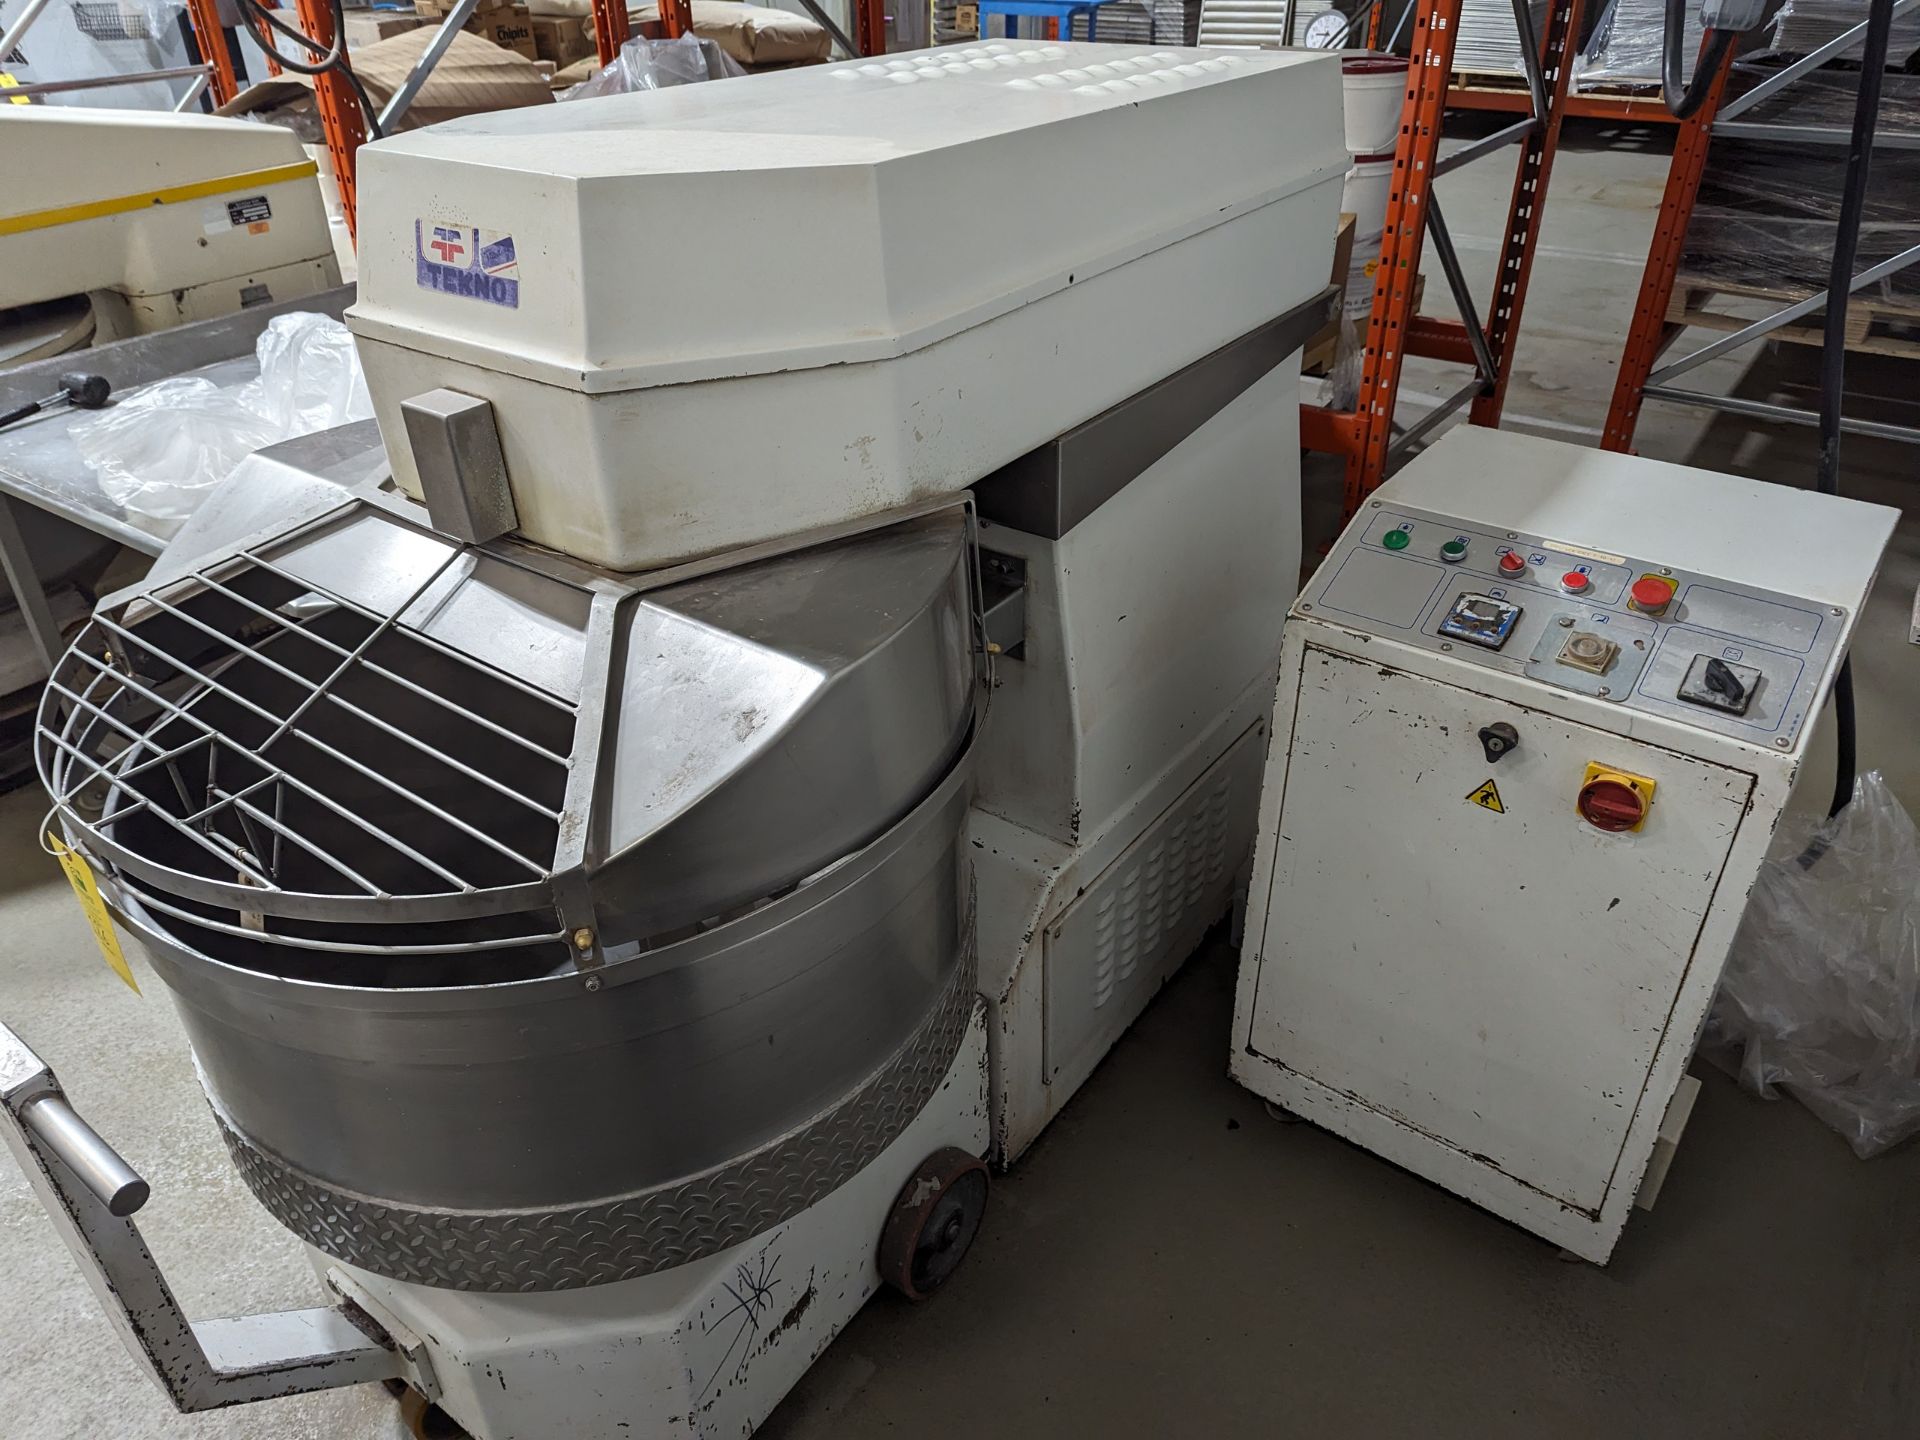 Tekno 200 ES Spiral Mixer with 2 Bowls, Dimensions LxWxH: 79x38x58 - Image 2 of 6